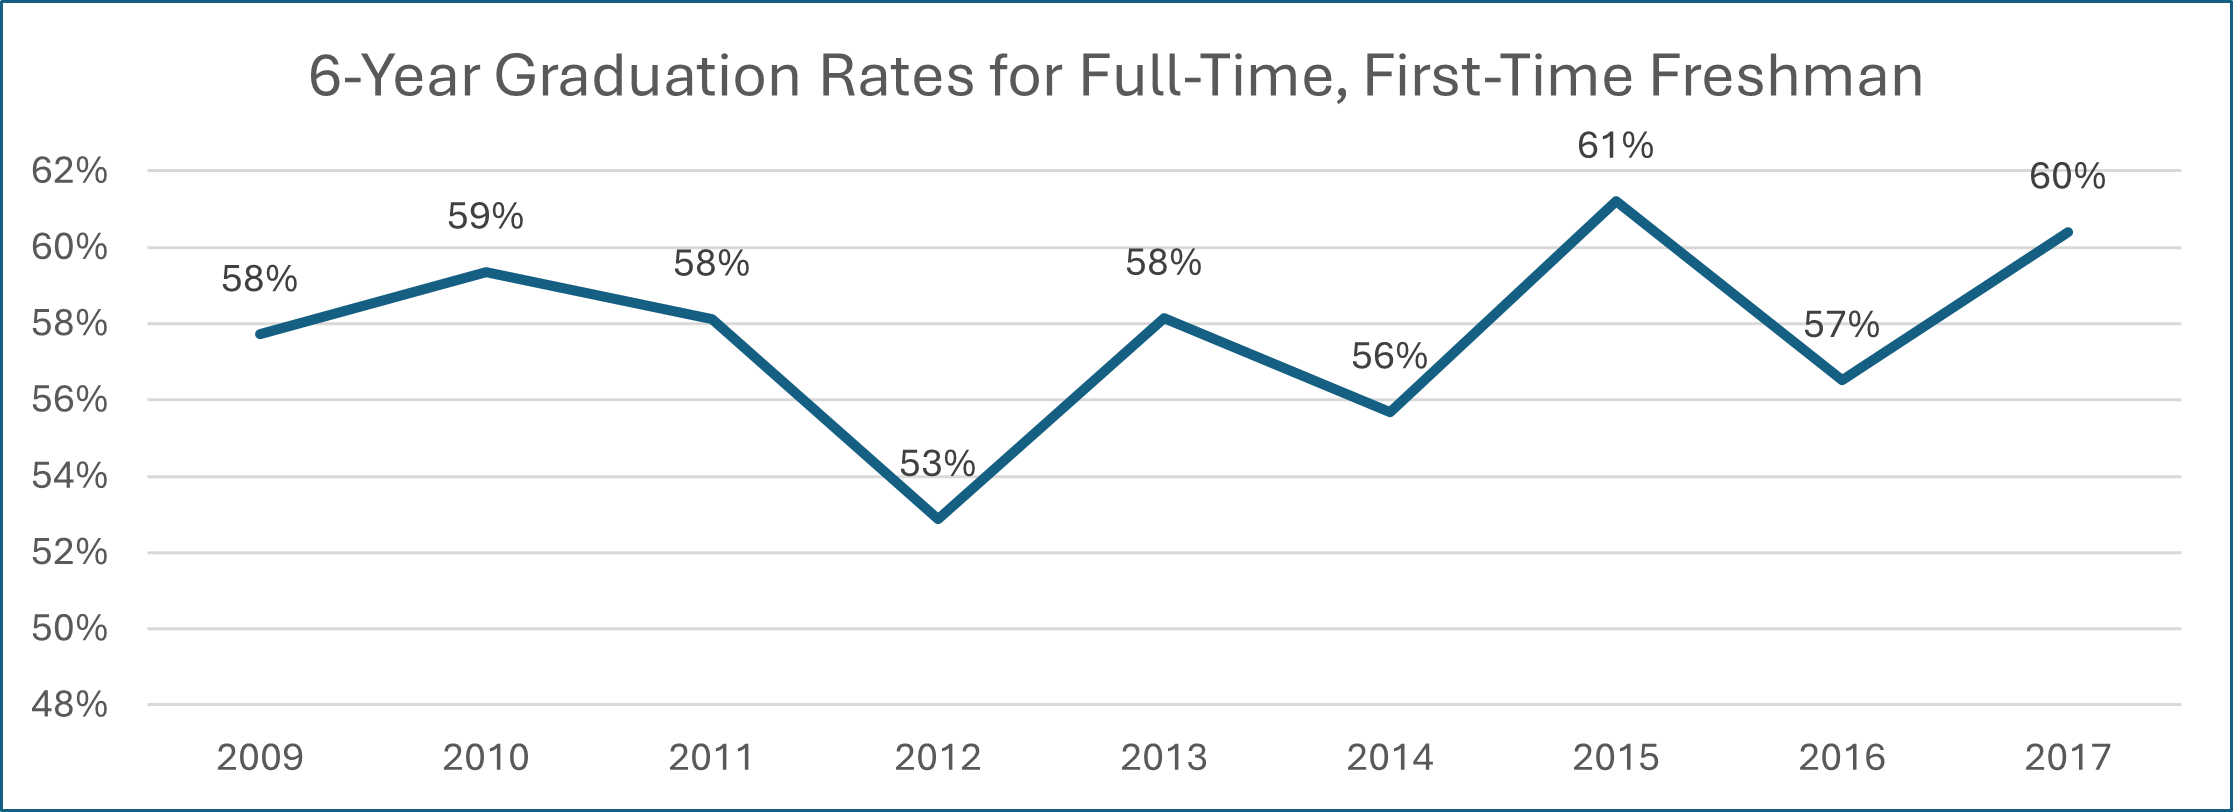  line graph of data retained from 6-Year Graduation Rates for cohorts